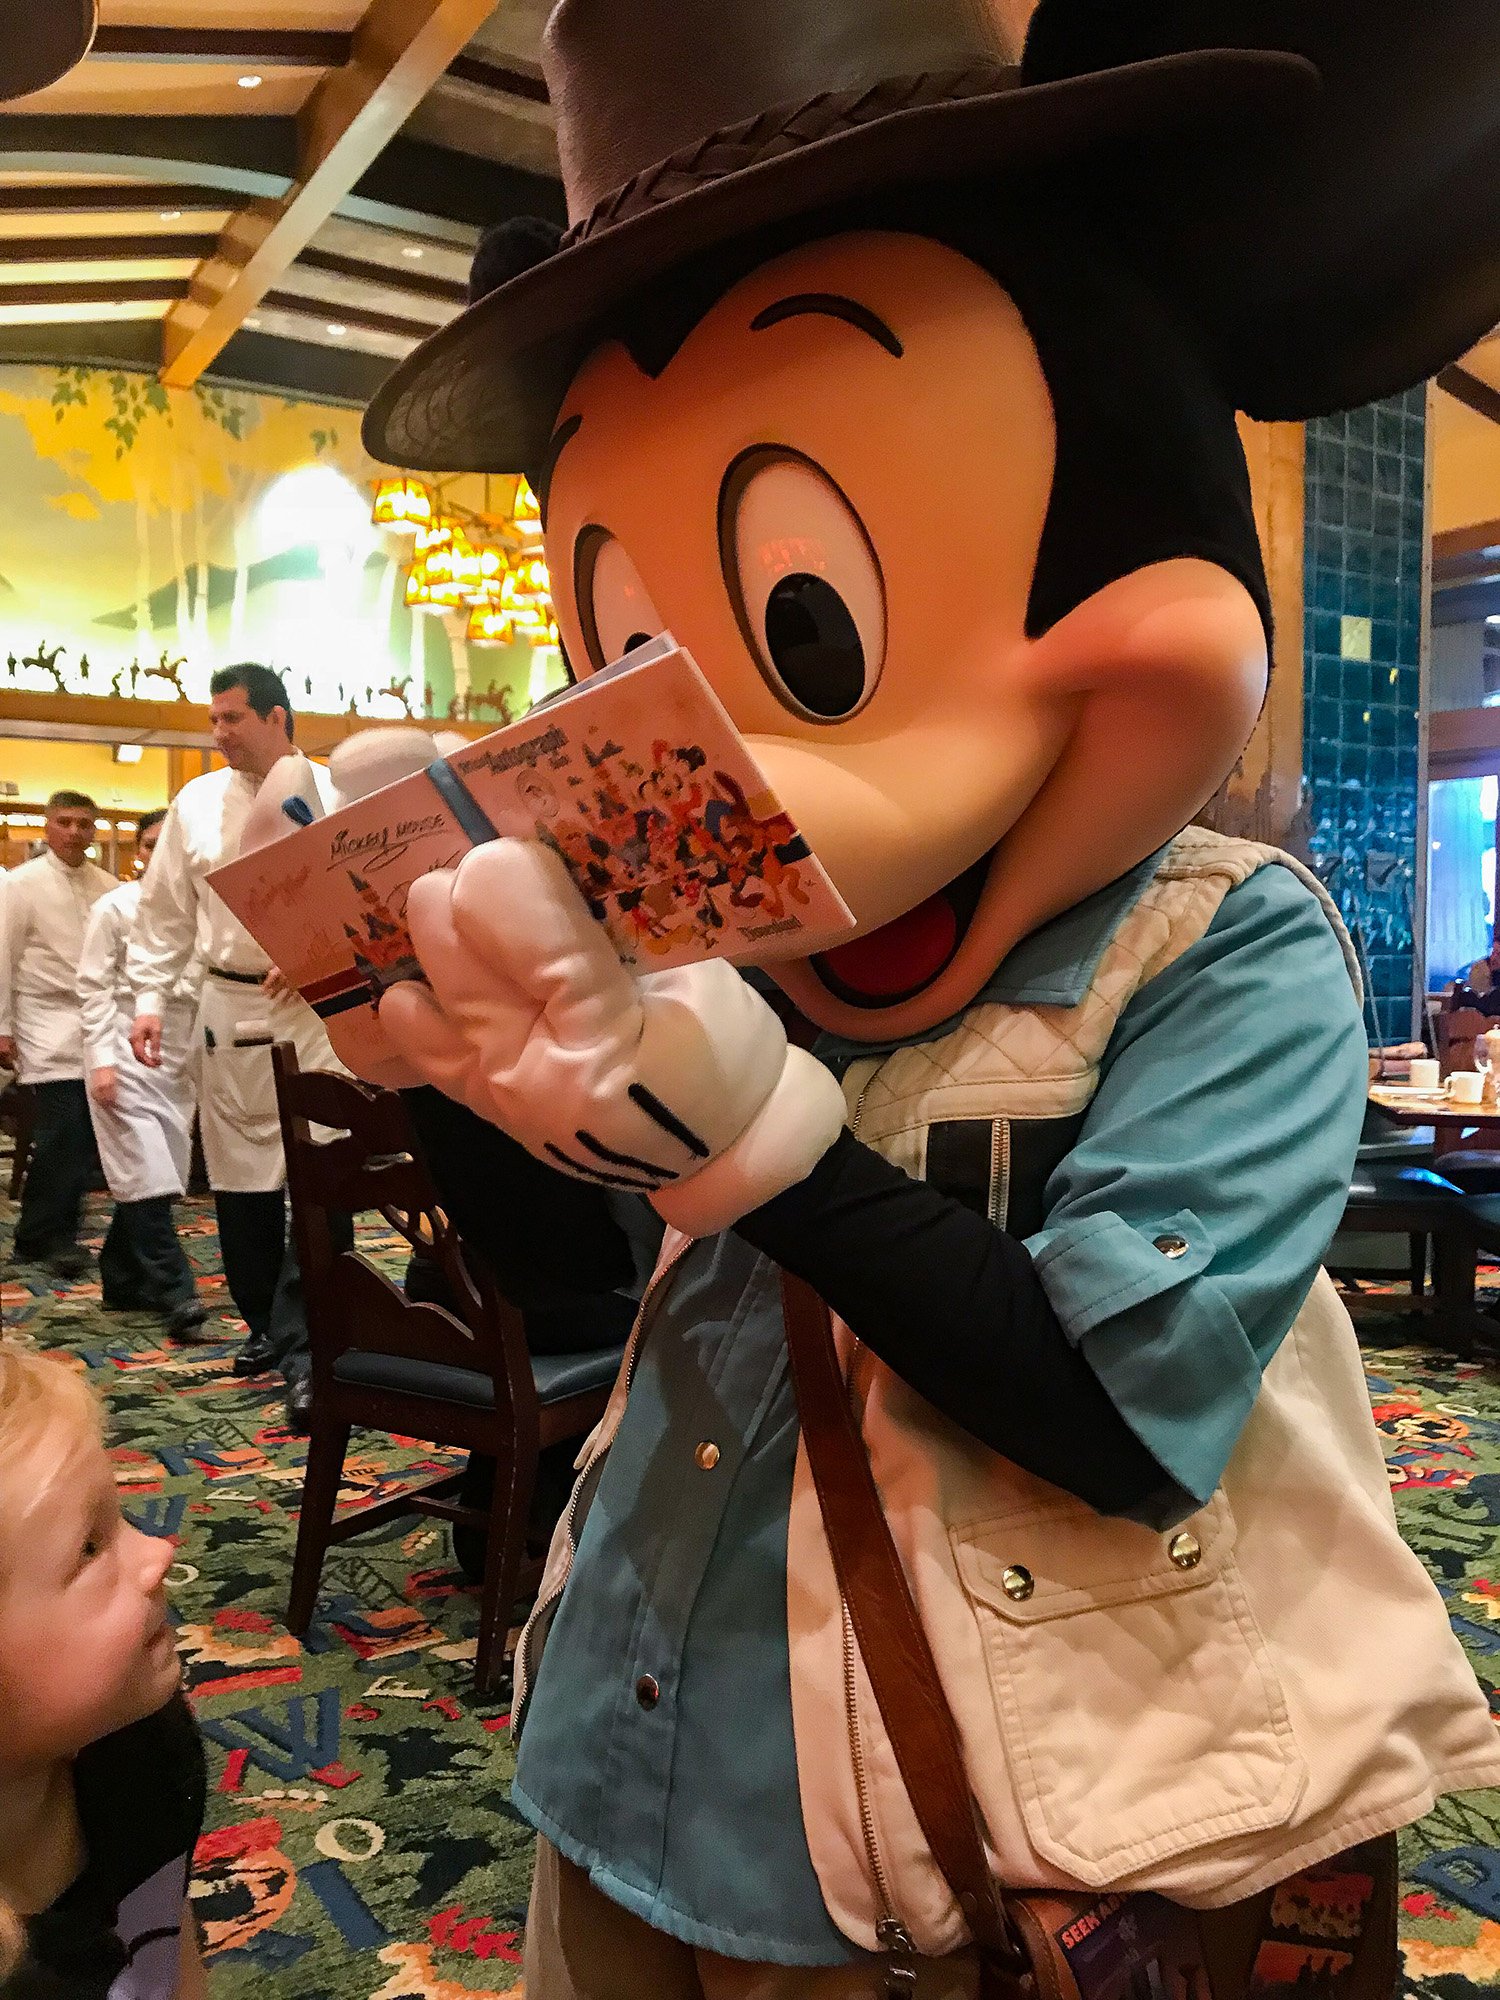 Disneyland Character Dining: This article shares everything you need to know about Mickey’s Tales of Adventure Breakfast Buffet and Mickey’s Tales of Adventure Brunch Buffet. From prices to timing to food items, it's all in this article.....a must read for Disneyland trip planning!